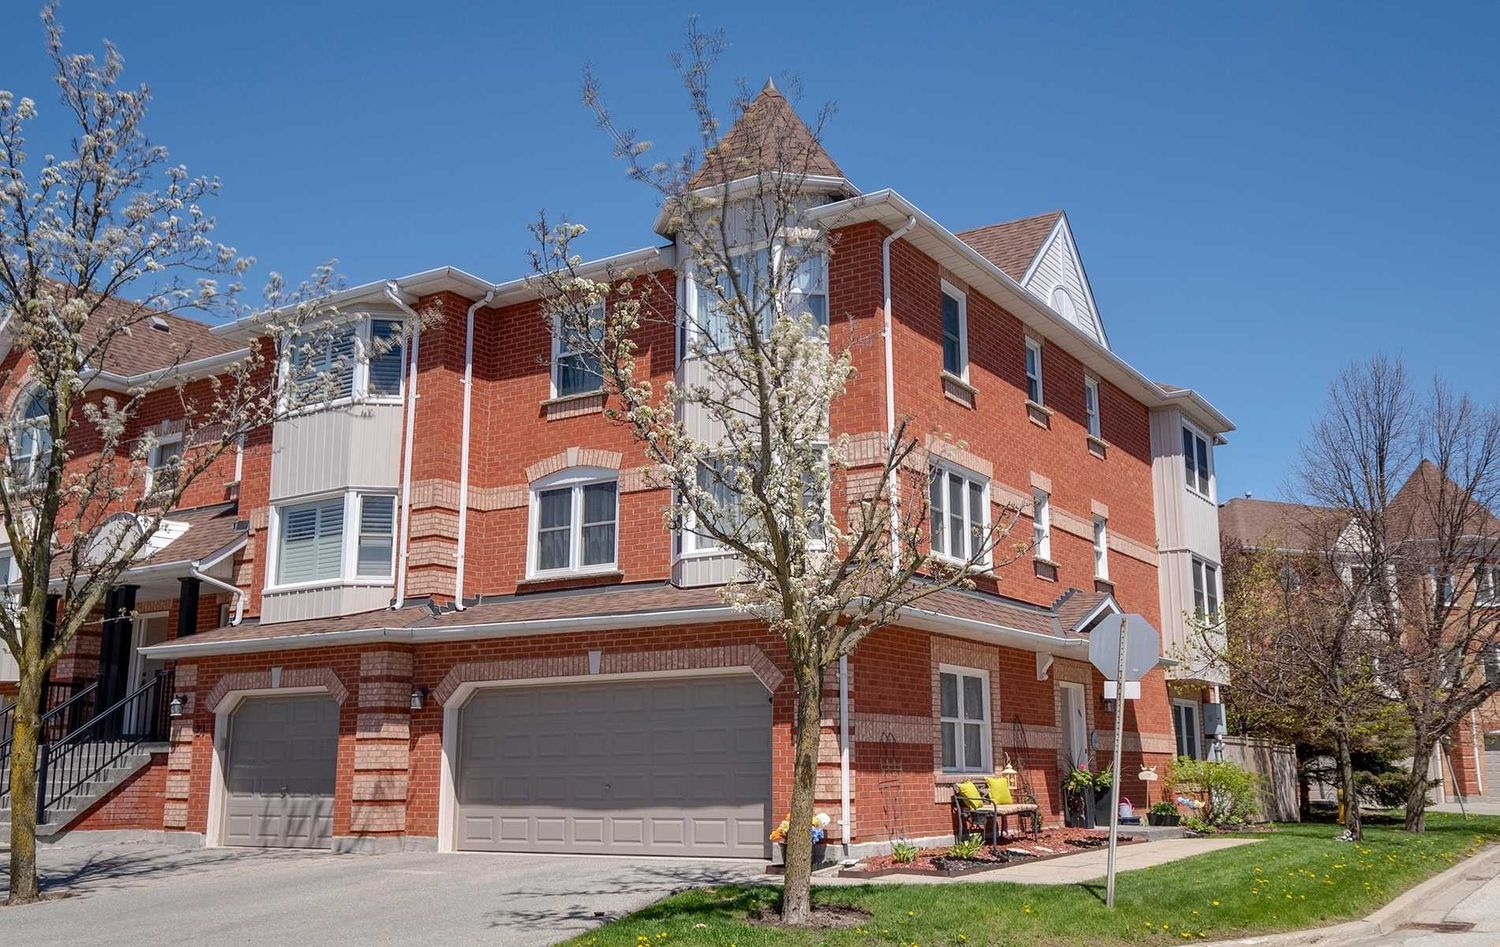 1-118 Leah Crescent. Leah Crescent Townhomes is located in  Vaughan, Toronto - image #1 of 3